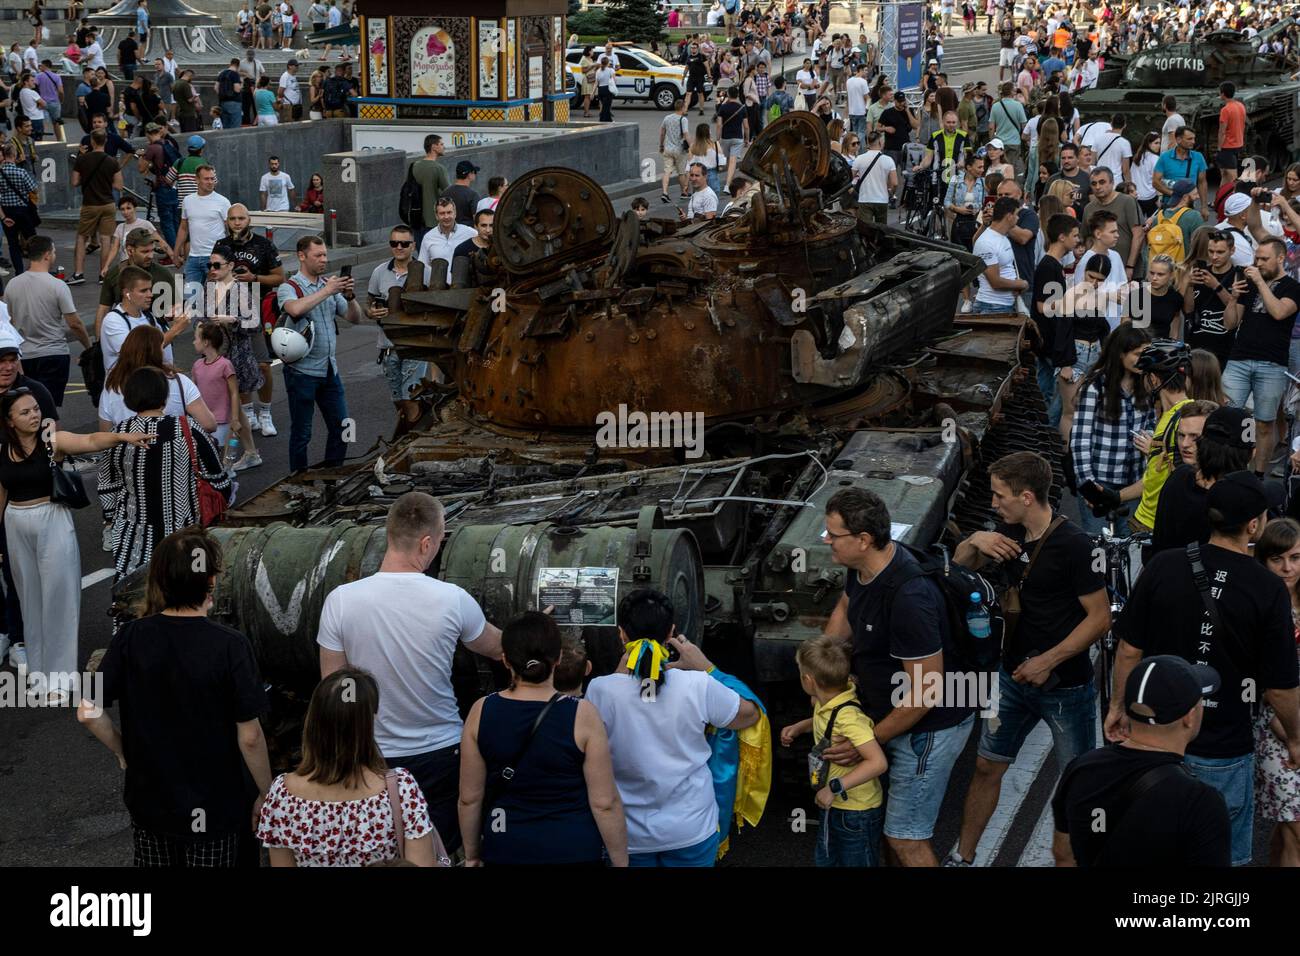 Kyiv, Kyiv Oblast, Ukraine. 21st Aug, 2022. Citizens flock to see the wreckage of destroyed Russian military tanks on the streets of Kyiv. As dedicated to the upcoming Independence Day of Ukraine, and nearly 6 months after the full-scale invasion of Ukraine on February 24, the country's capital Kyiv holds an exhibition on the main street of Khreschaytk Street showing multiple destroyed military equipment, tanks and weapons from The Armed Forces of The Russian Federation (AFRF).As the Russian full invasion of Ukraine started on February 24, the war that has killed numerous civilians and soldi Stock Photo